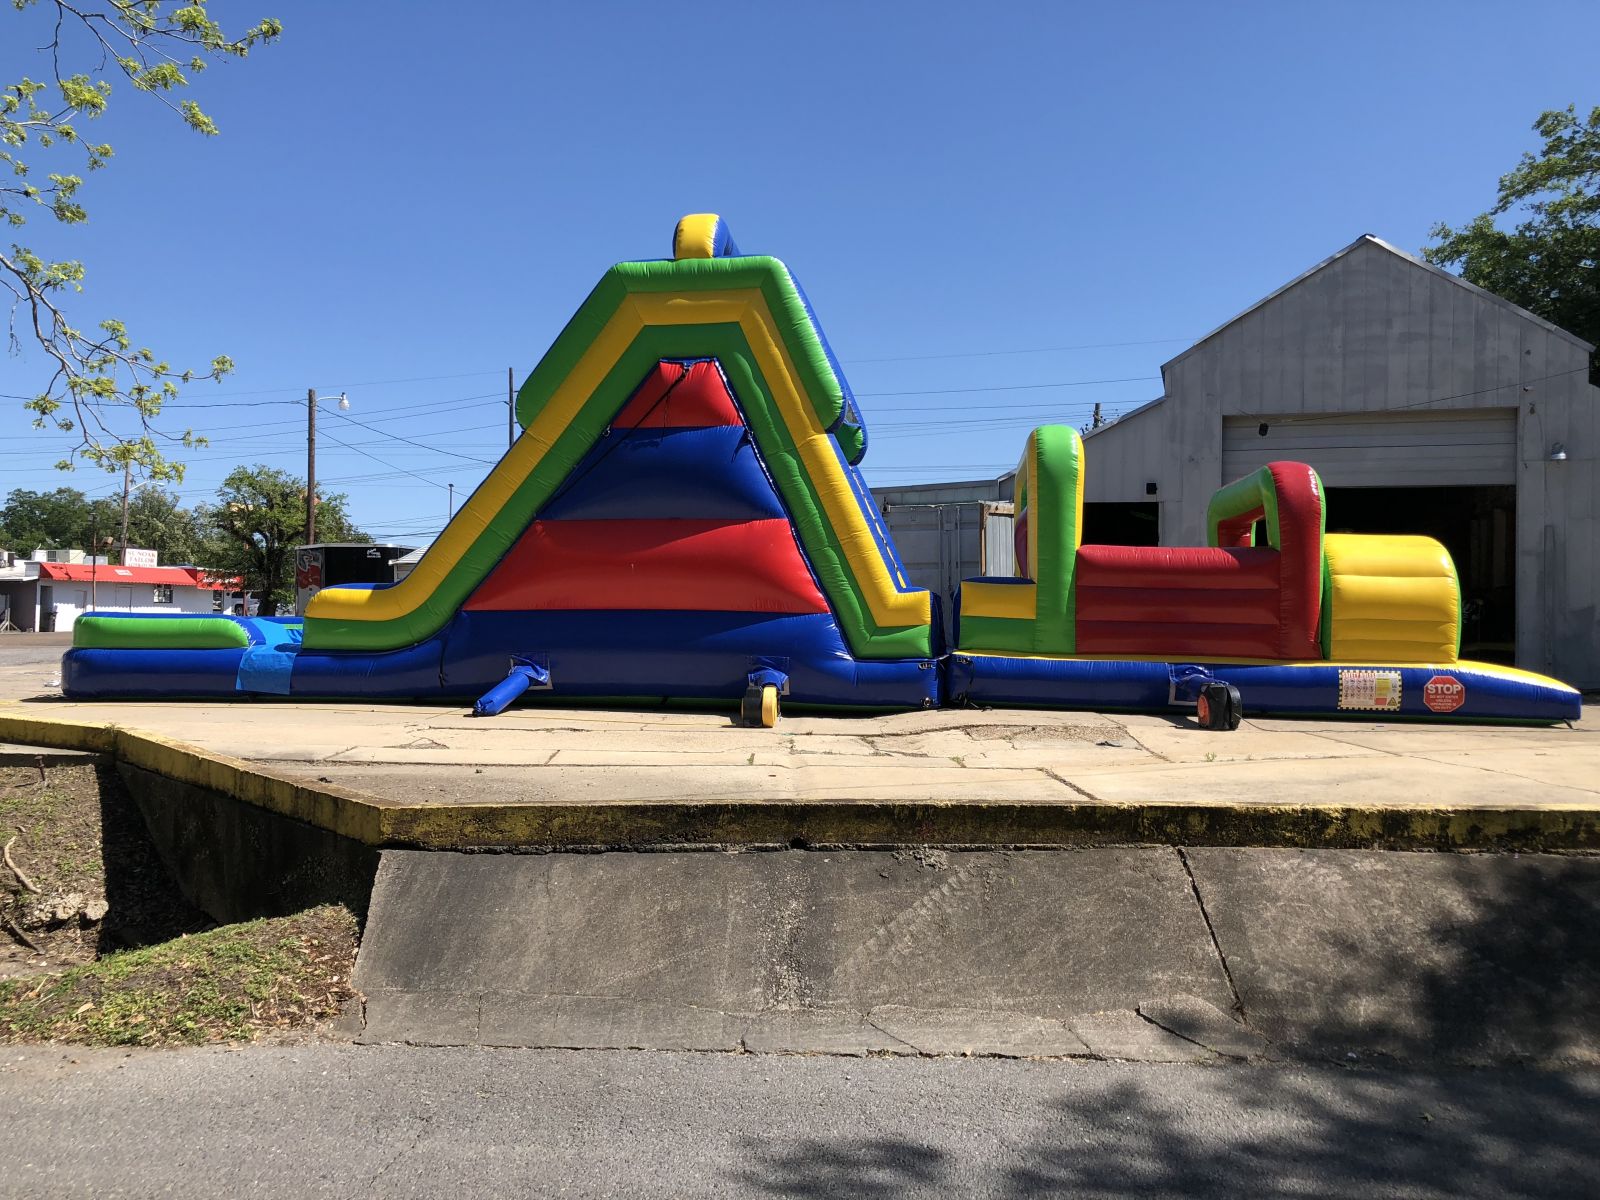 52' obstacle course rental